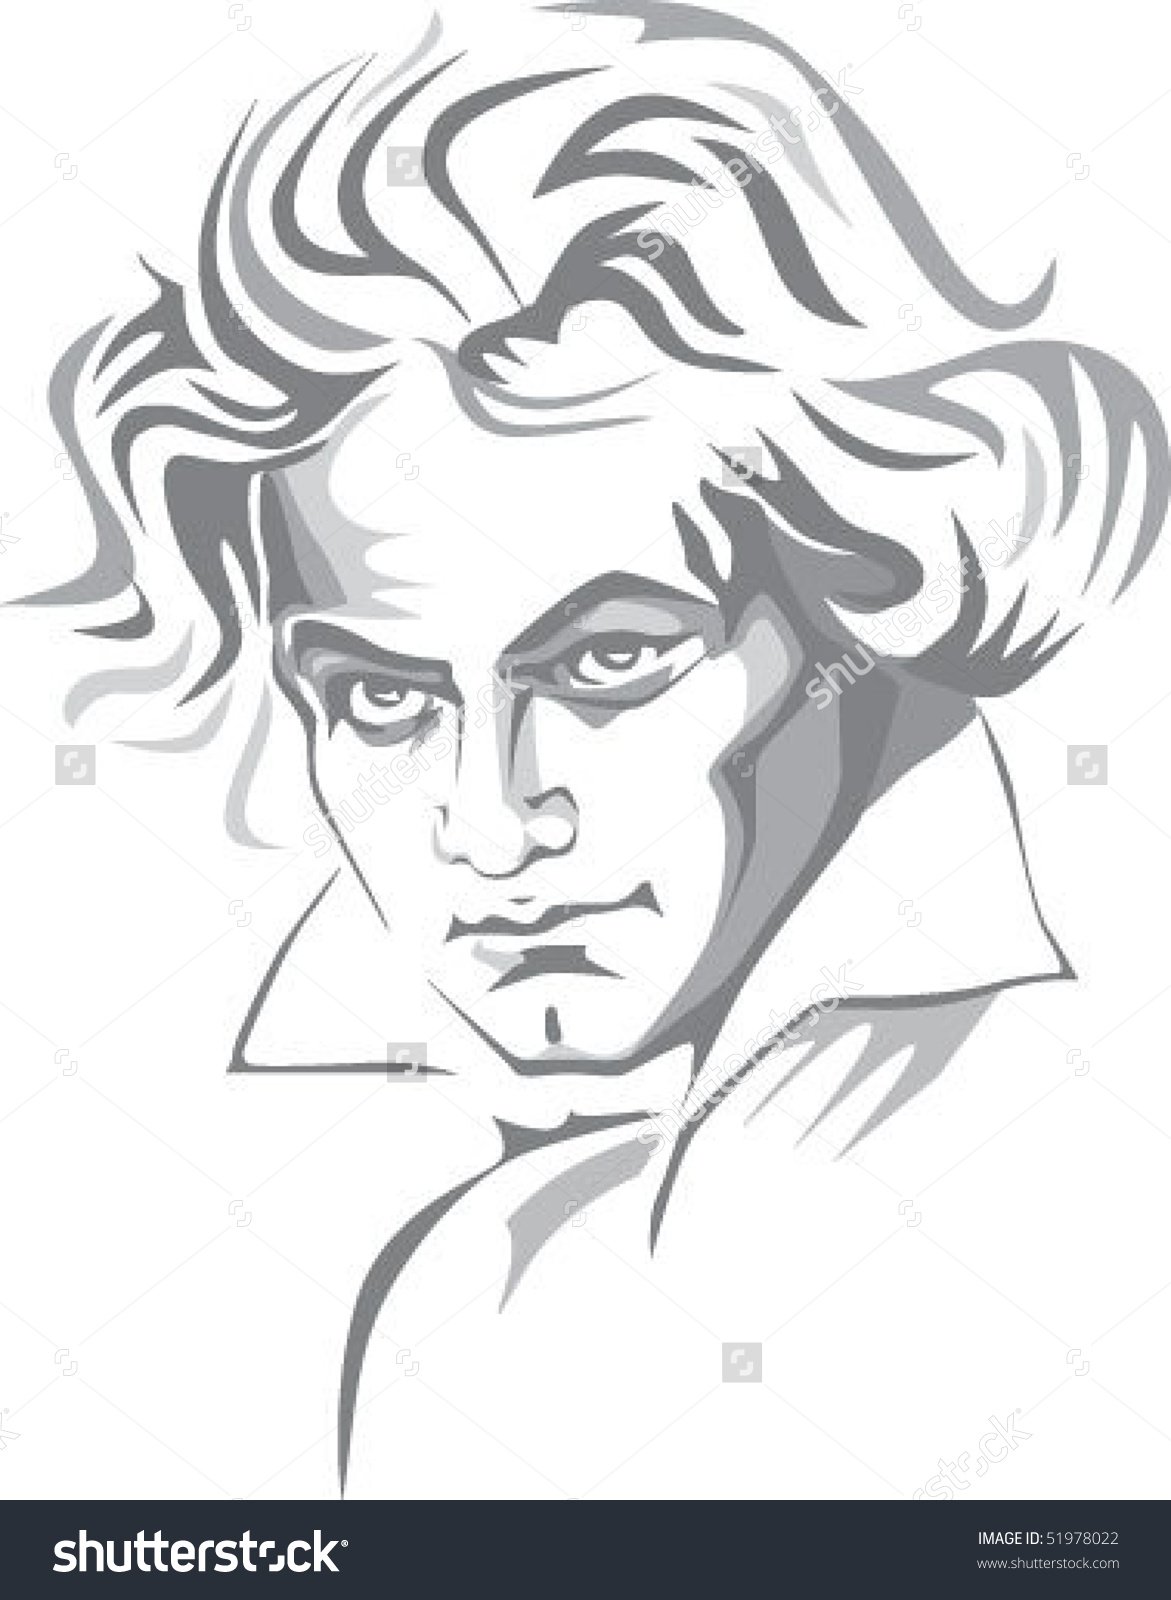 Beethoven clipart - Clipground